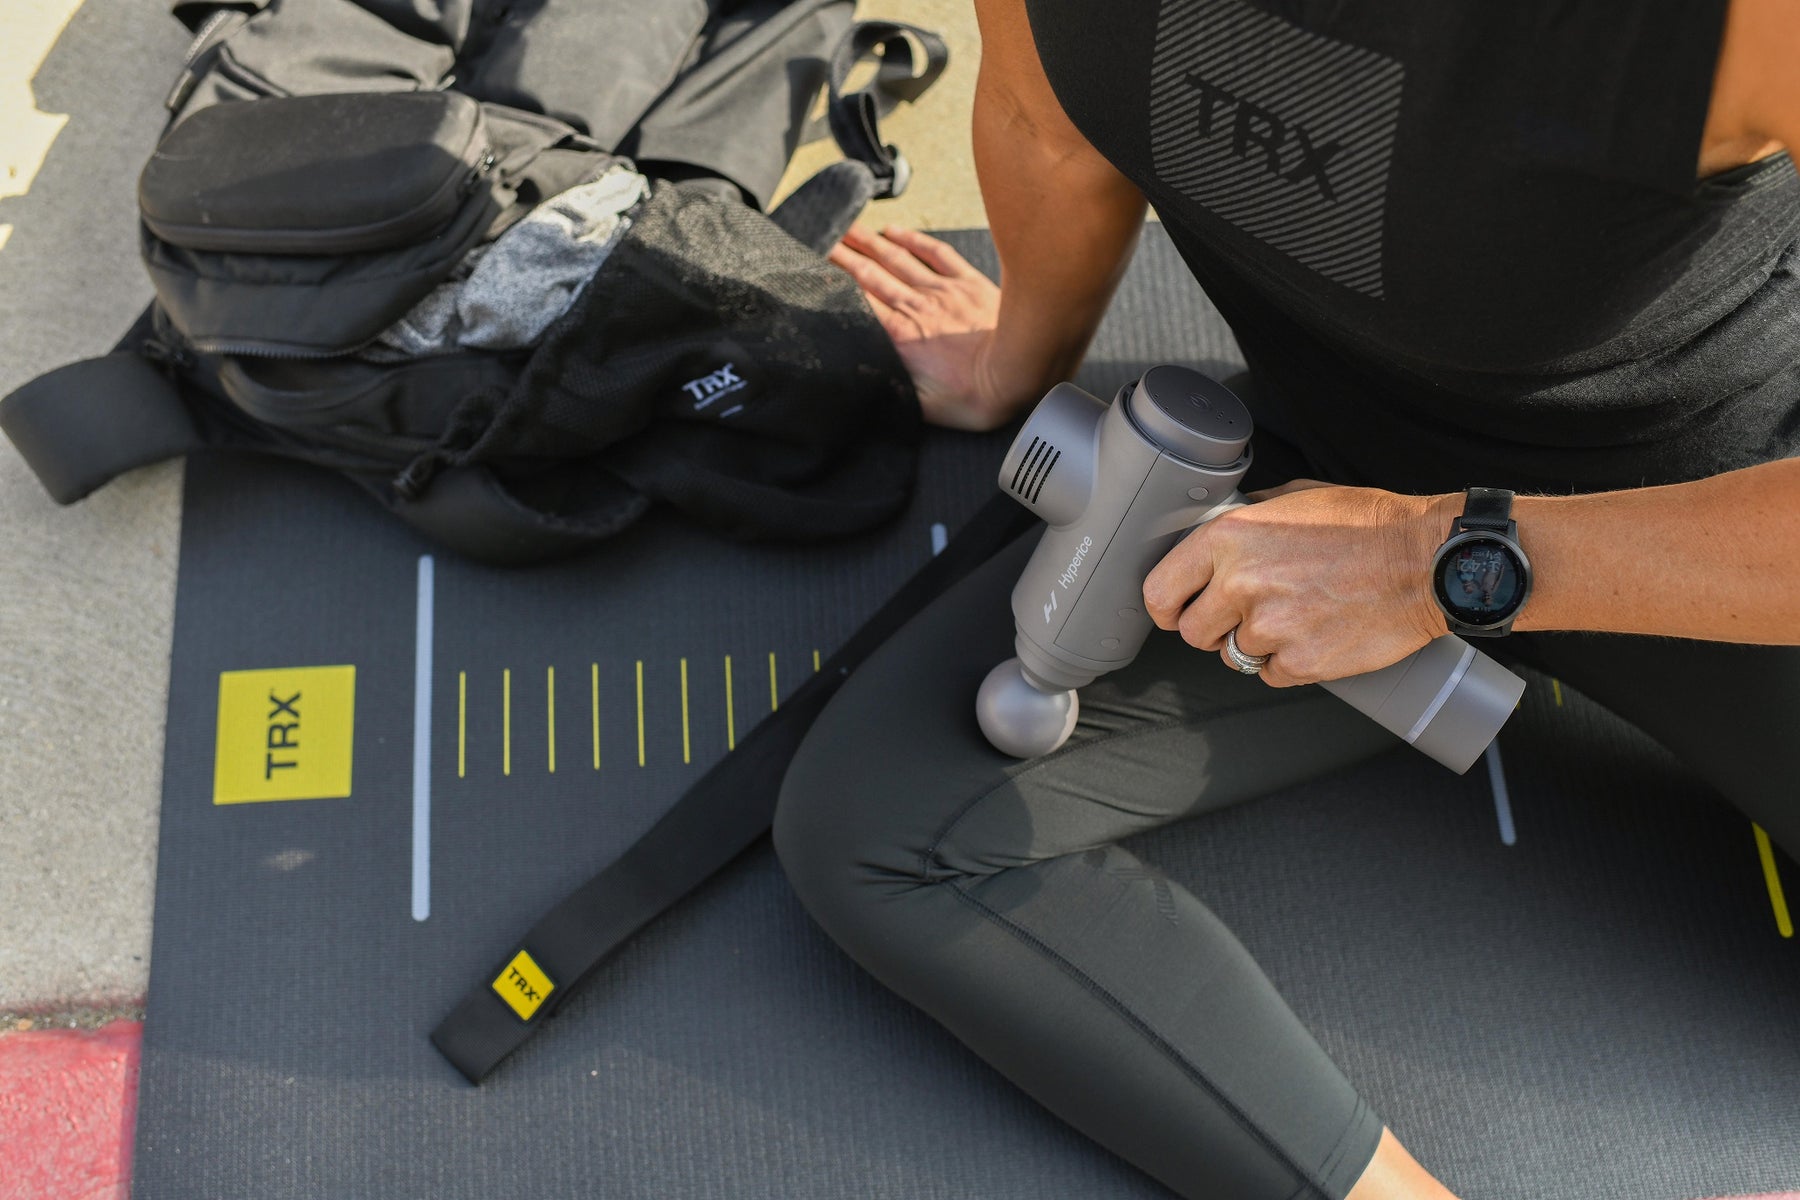 TRX x Hyperice for Corrective Exercise and Recovery workshop